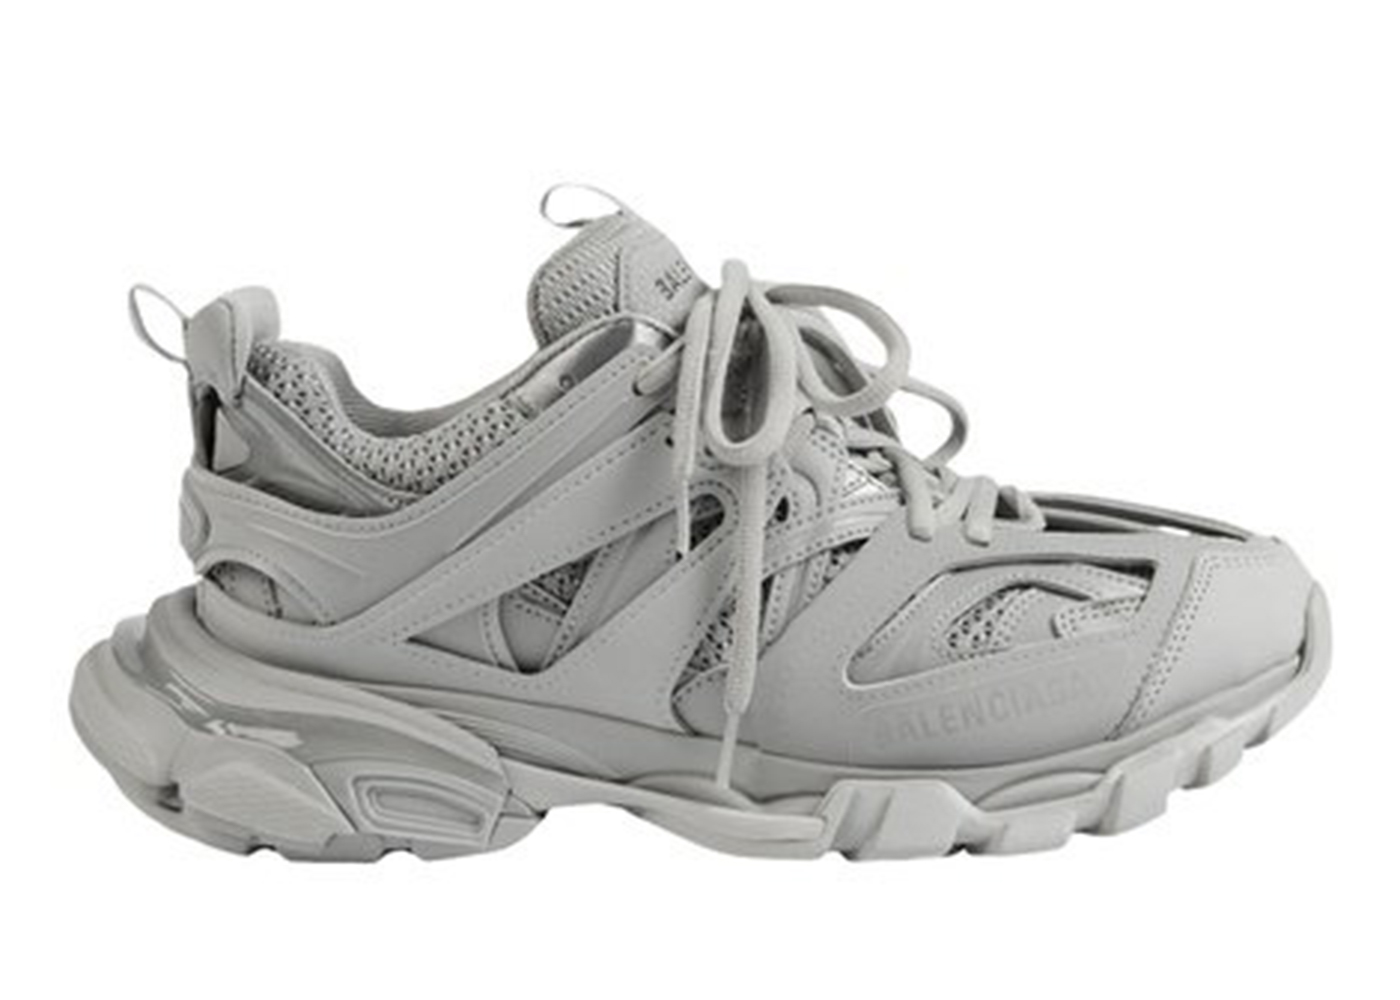 Balenciaga  Shoes  Balenciaga Track Runners In Whitegray With Lavender  And Orange Detail Color  Poshmark